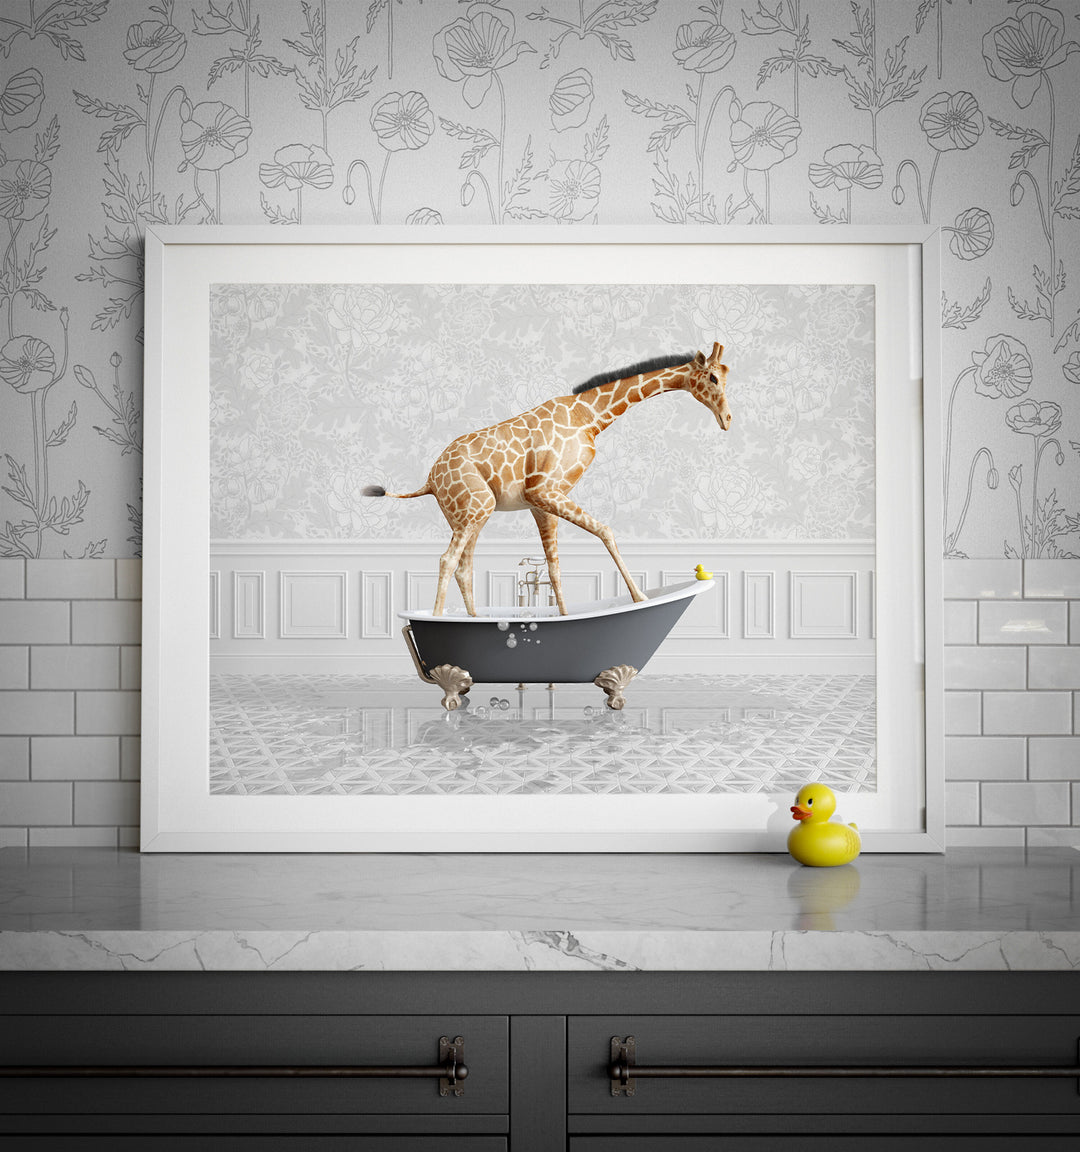 Animals in Bathtubs prints by The Crown Prints